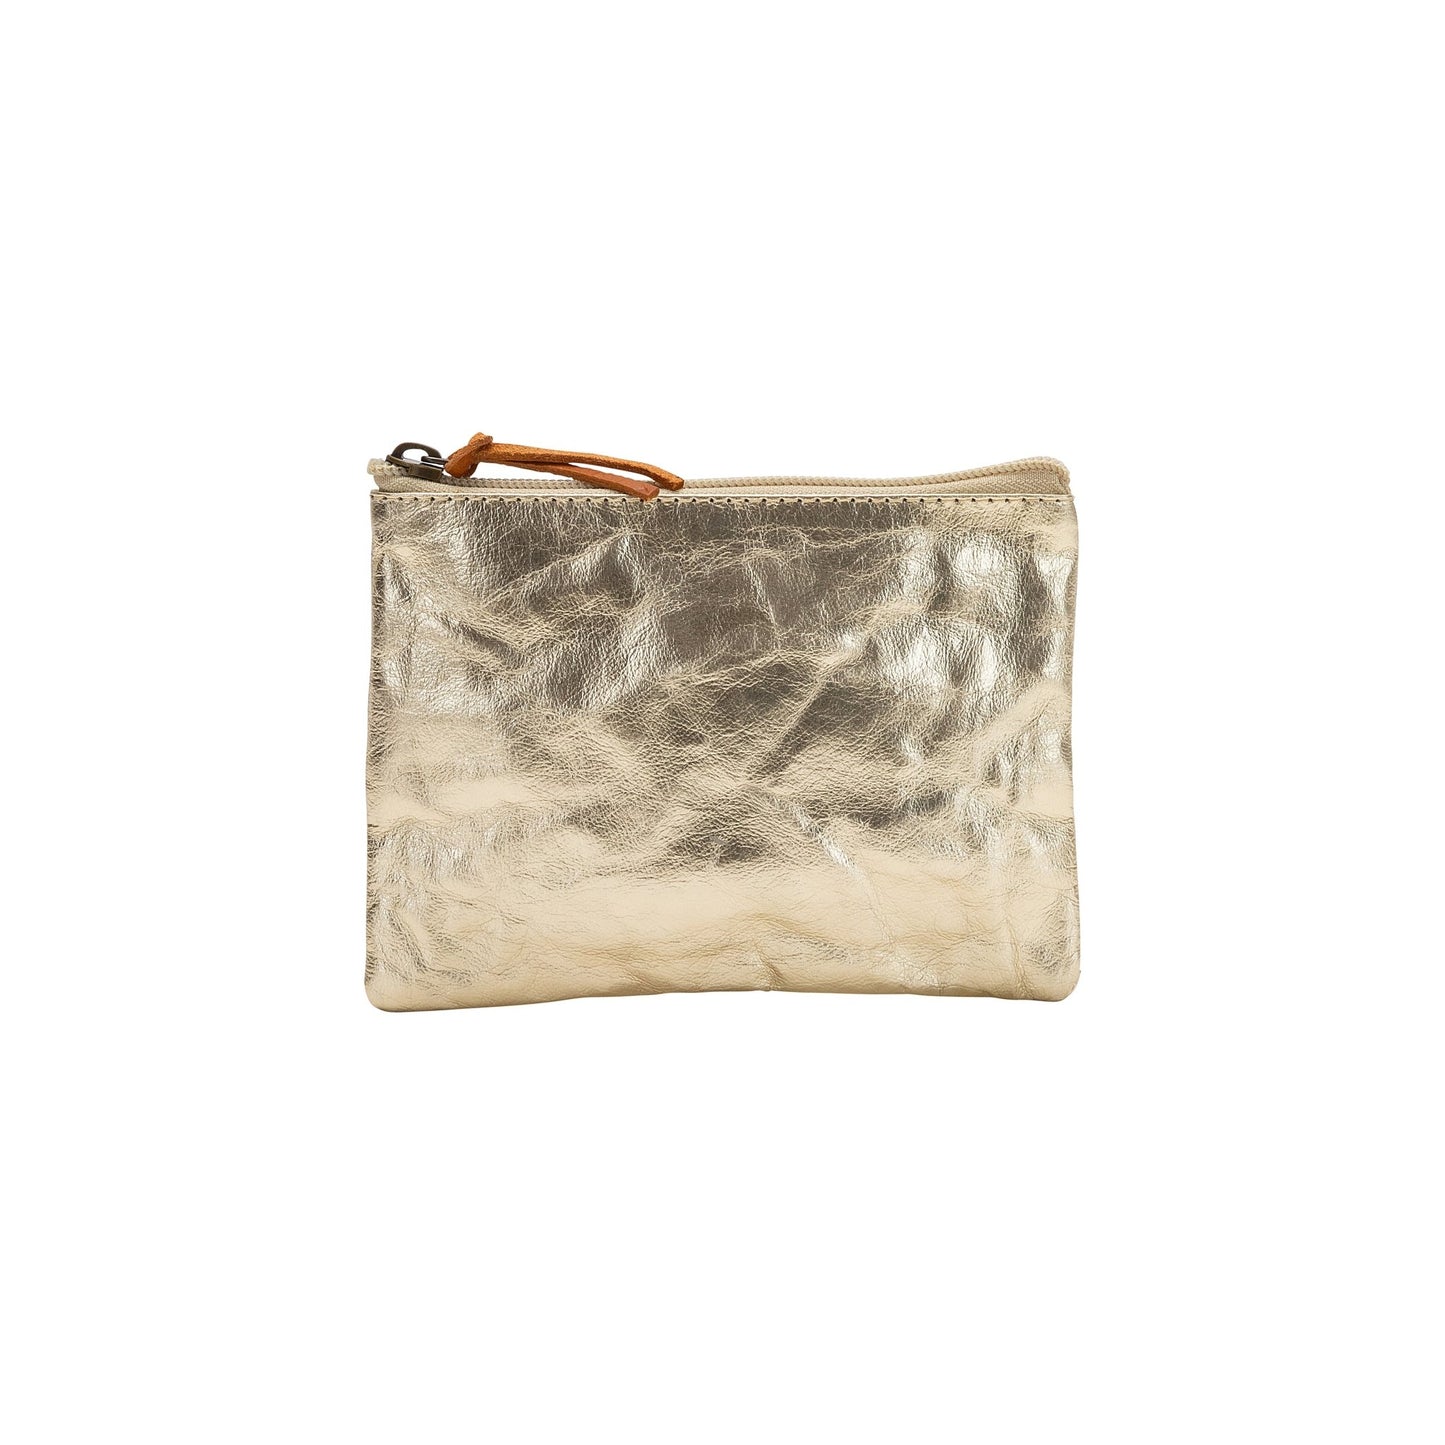 A washable paper pouch is shown from the front in metallic gold, featuring a brown zip toggle.